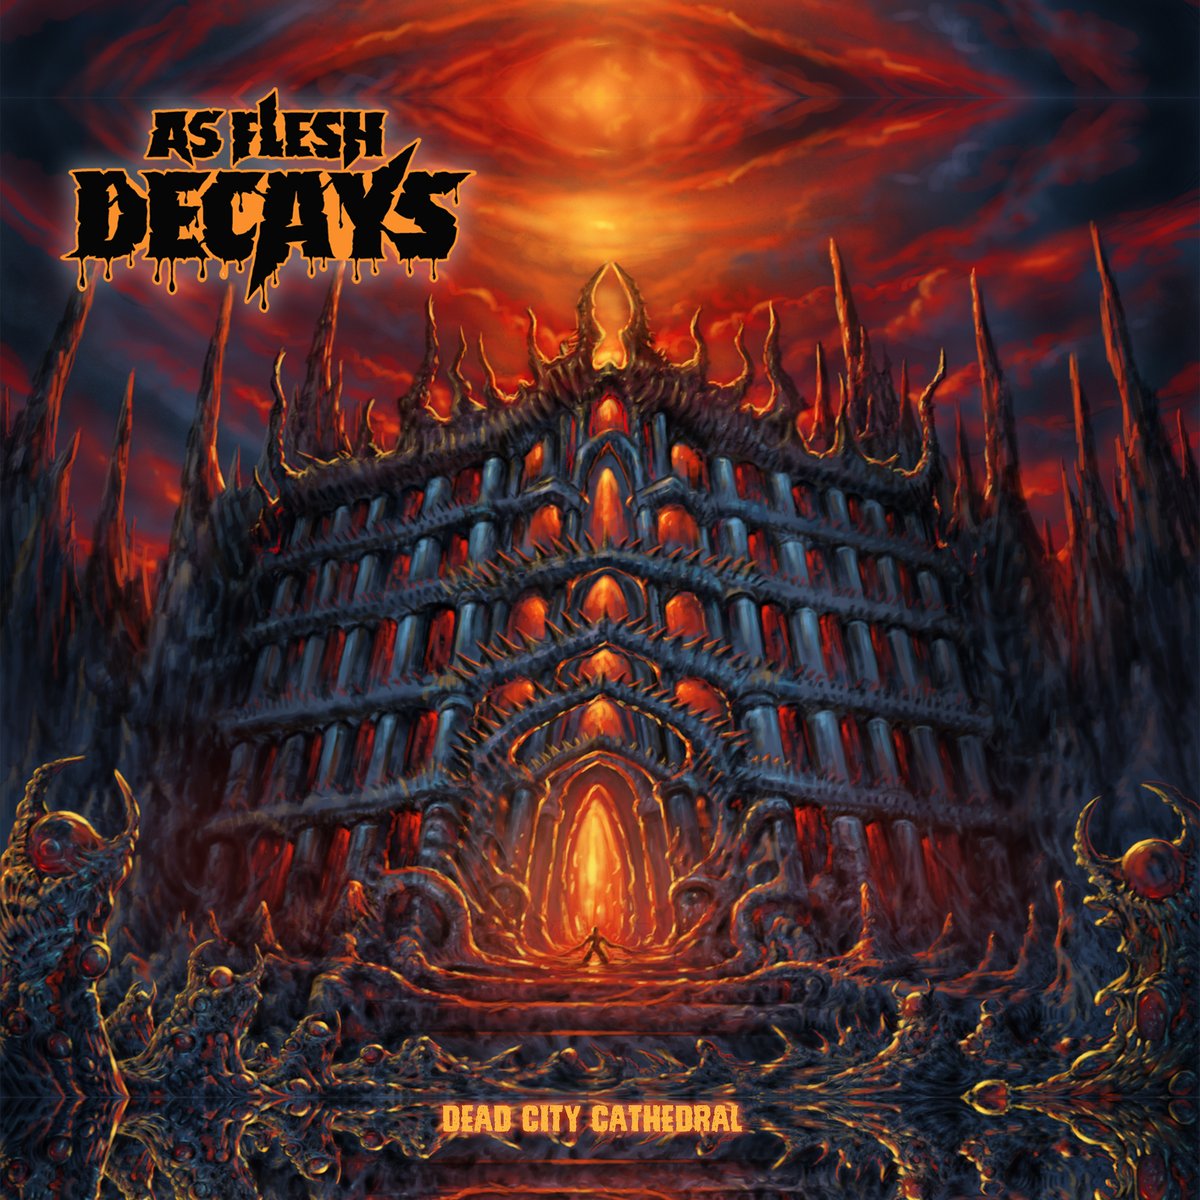 1054 — As Flesh Decays - Dead City Cathedral CD